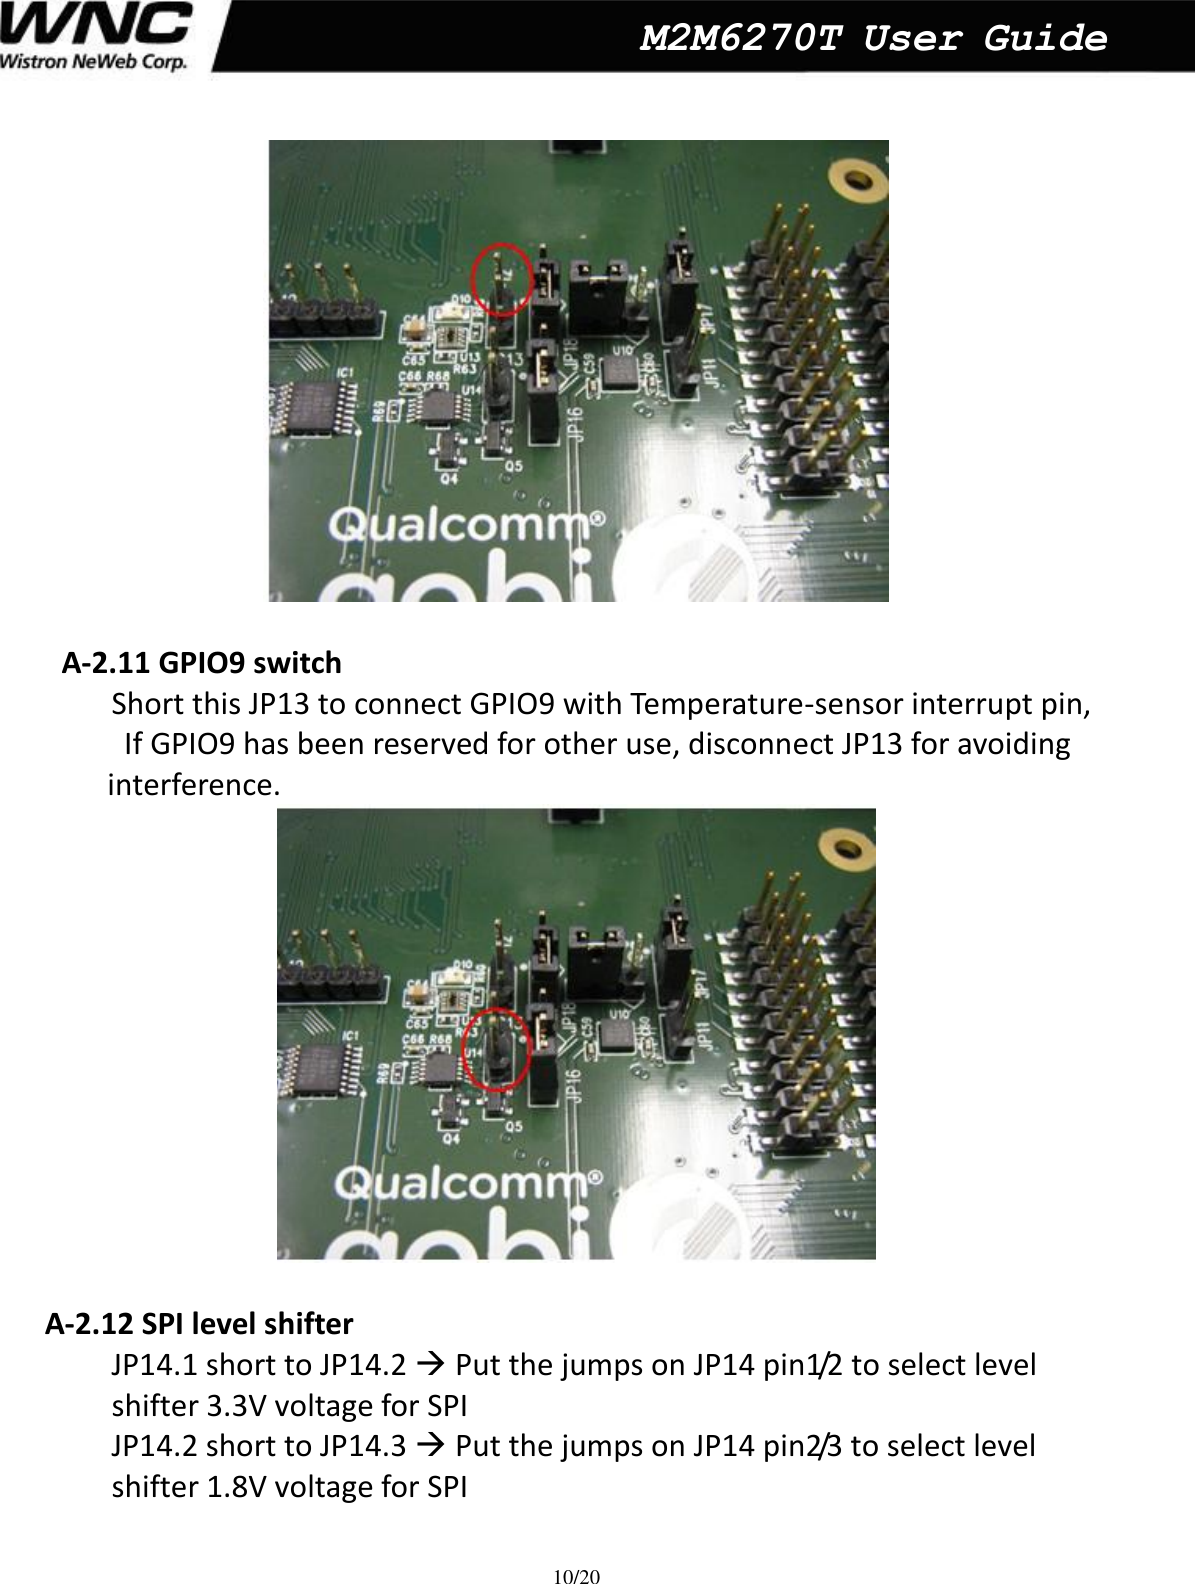  10/20  M2M6270T User Guide   A-2.11 GPIO9 switch   Short this JP13 to connect GPIO9 with Temperature-sensor interrupt pin, If GPIO9 has been reserved for other use, disconnect JP13 for avoiding interference.     A-2.12 SPI level shifter   JP14.1 short to JP14.2  Put the jumps on JP14 pin1/2 to select level   shifter 3.3V voltage for SPI JP14.2 short to JP14.3  Put the jumps on JP14 pin2/3 to select level   shifter 1.8V voltage for SPI 